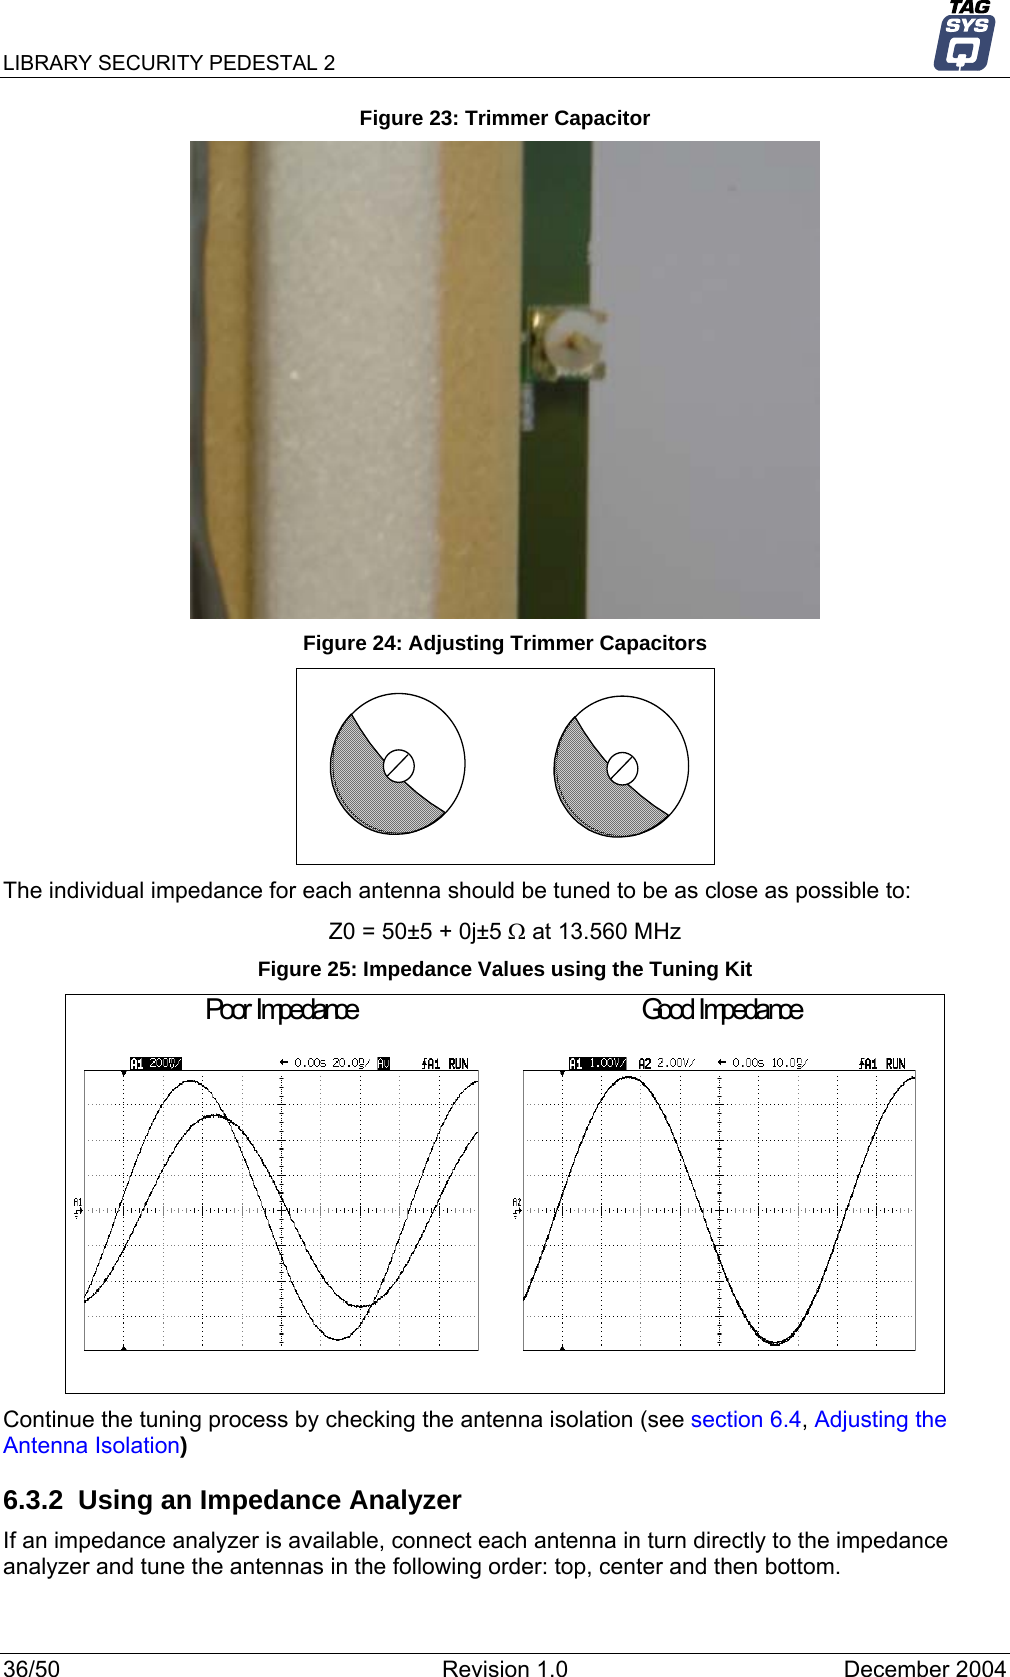 LIBRARY SECURITY PEDESTAL 2   Figure 23: Trimmer Capacitor  Figure 24: Adjusting Trimmer Capacitors  The individual impedance for each antenna should be tuned to be as close as possible to: Z0 = 50±5 + 0j±5 Ω at 13.560 MHz Figure 25: Impedance Values using the Tuning Kit Poor Impedance Good Impedance Continue the tuning process by checking the antenna isolation (see section 6.4, Adjusting the Antenna Isolation) 6.3.2  Using an Impedance Analyzer If an impedance analyzer is available, connect each antenna in turn directly to the impedance analyzer and tune the antennas in the following order: top, center and then bottom. 36/50  Revision 1.0  December 2004 